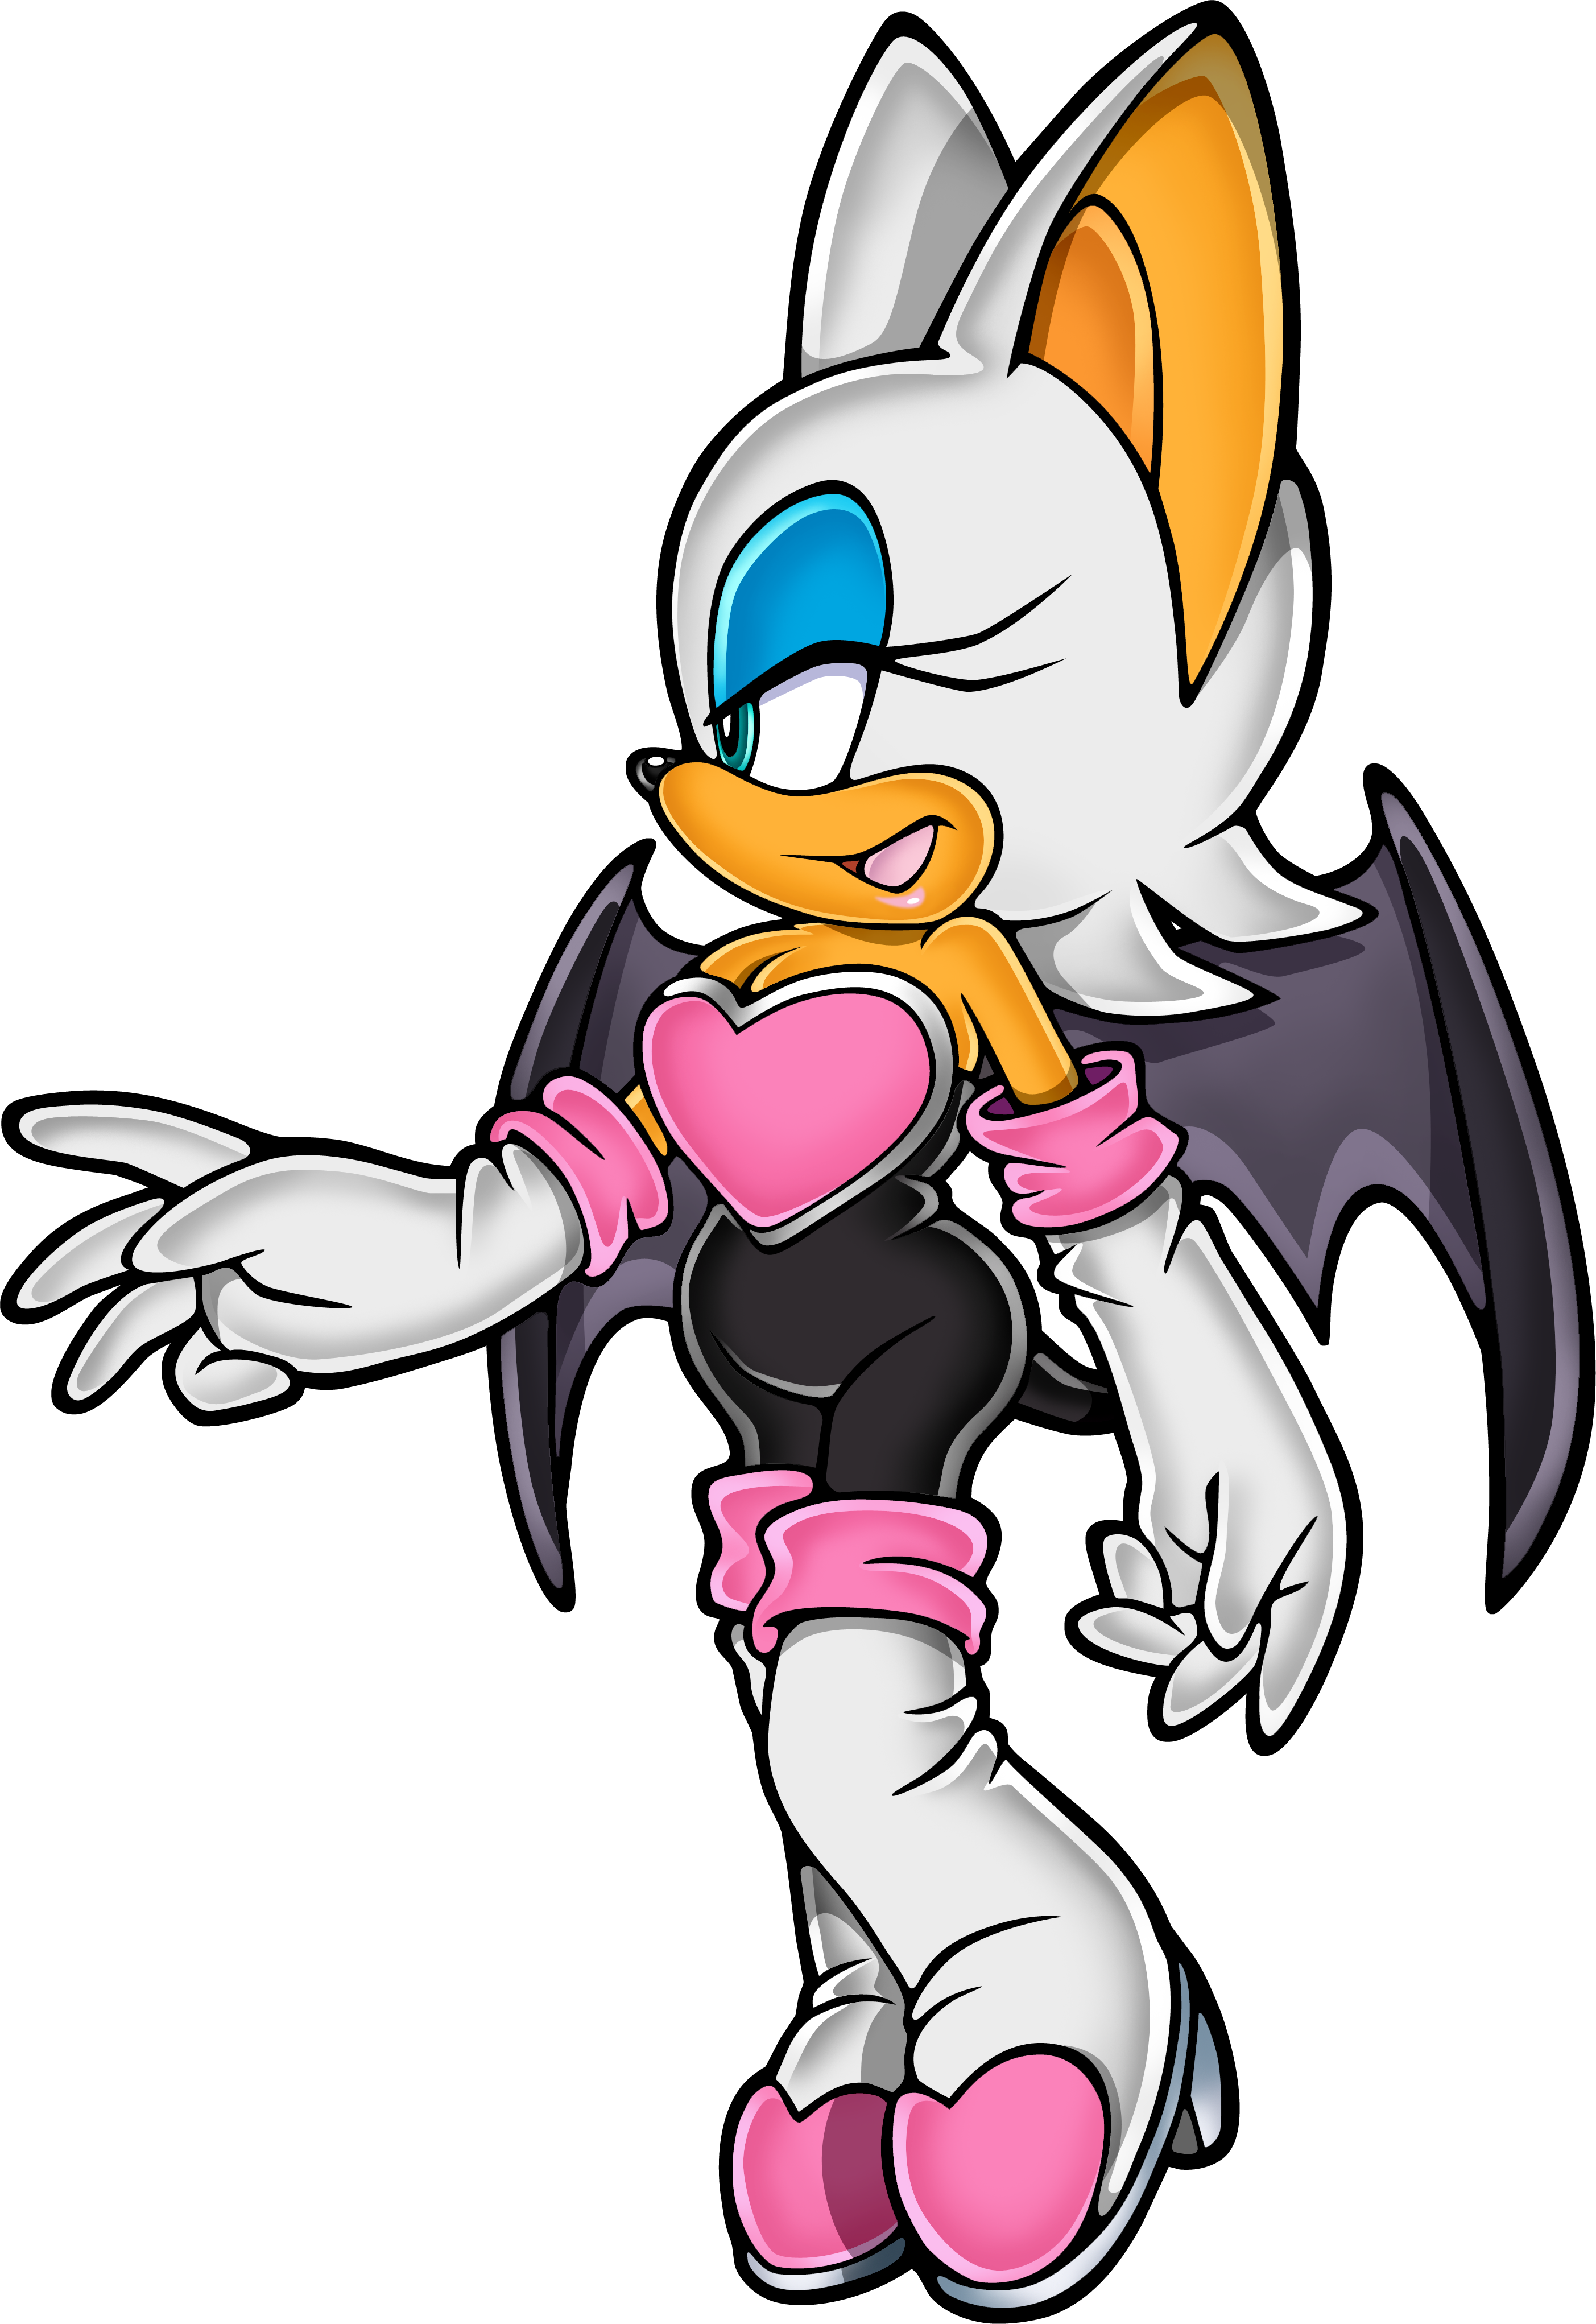 sonic project x rouge